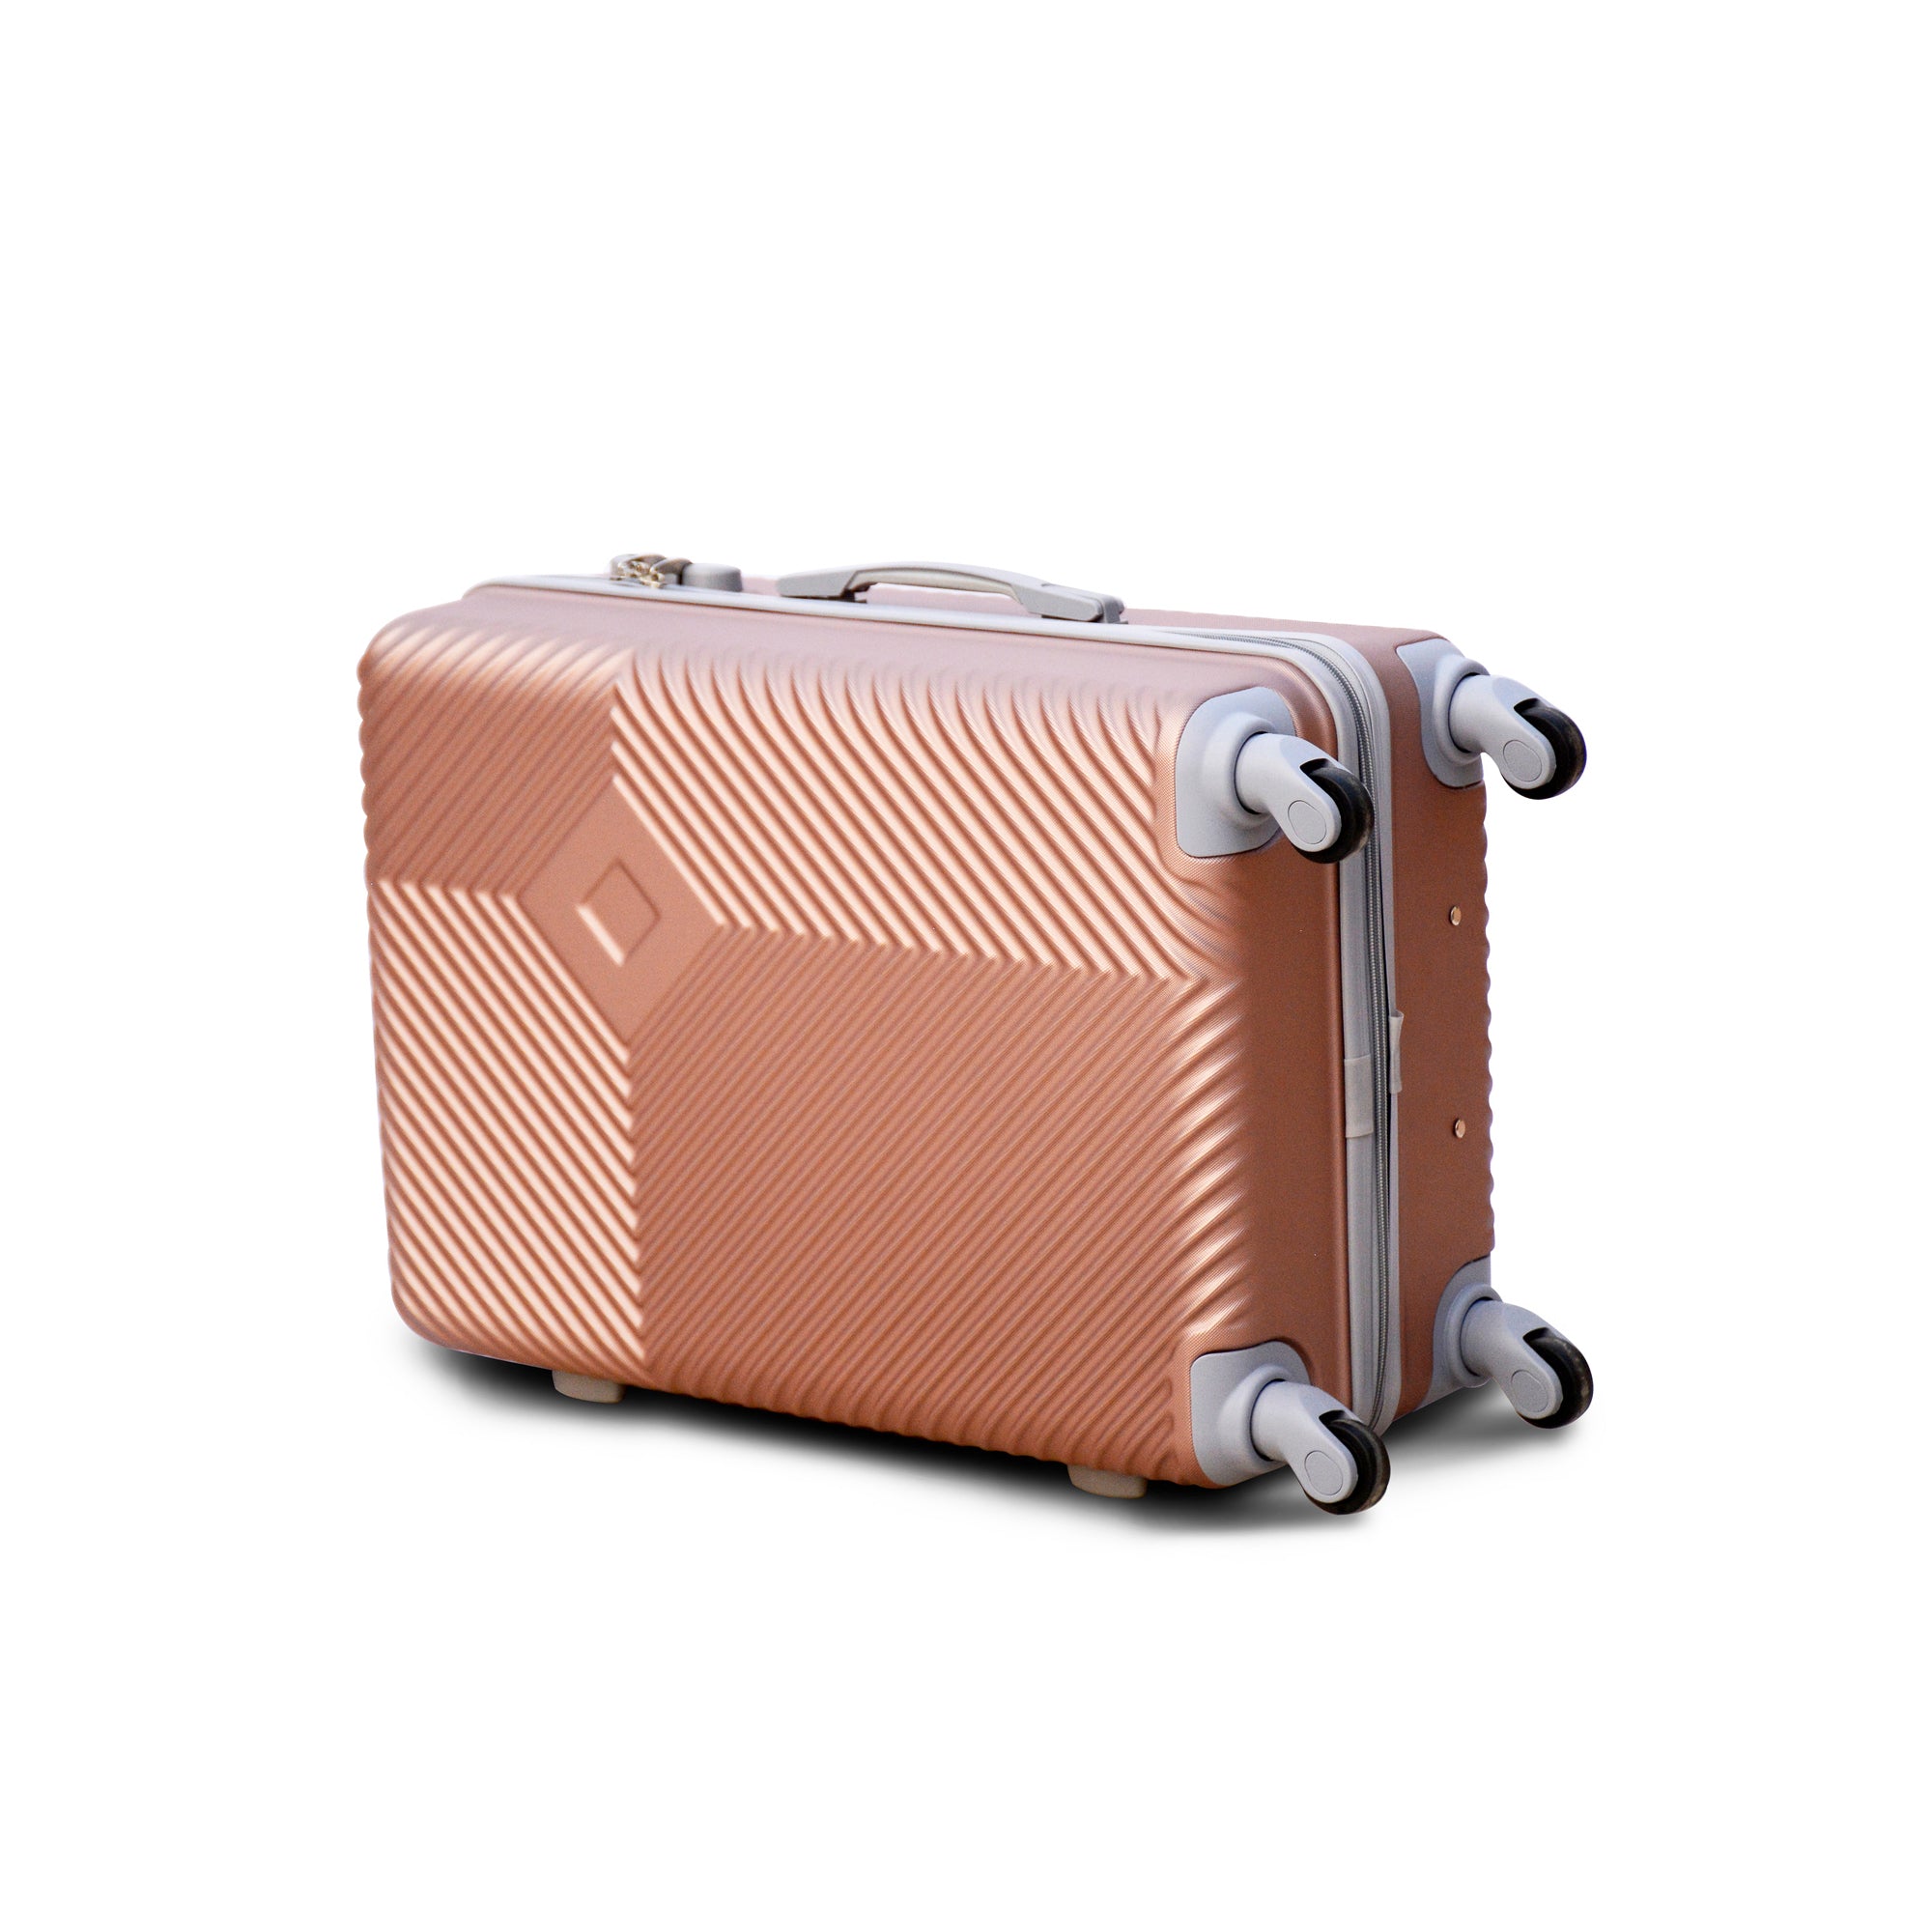 3 Pcs Full Set SI ABS Rose Gold Colour Lightweight Hard Case Luggage 20" 24" 28 Inch | 2 Year Warranty